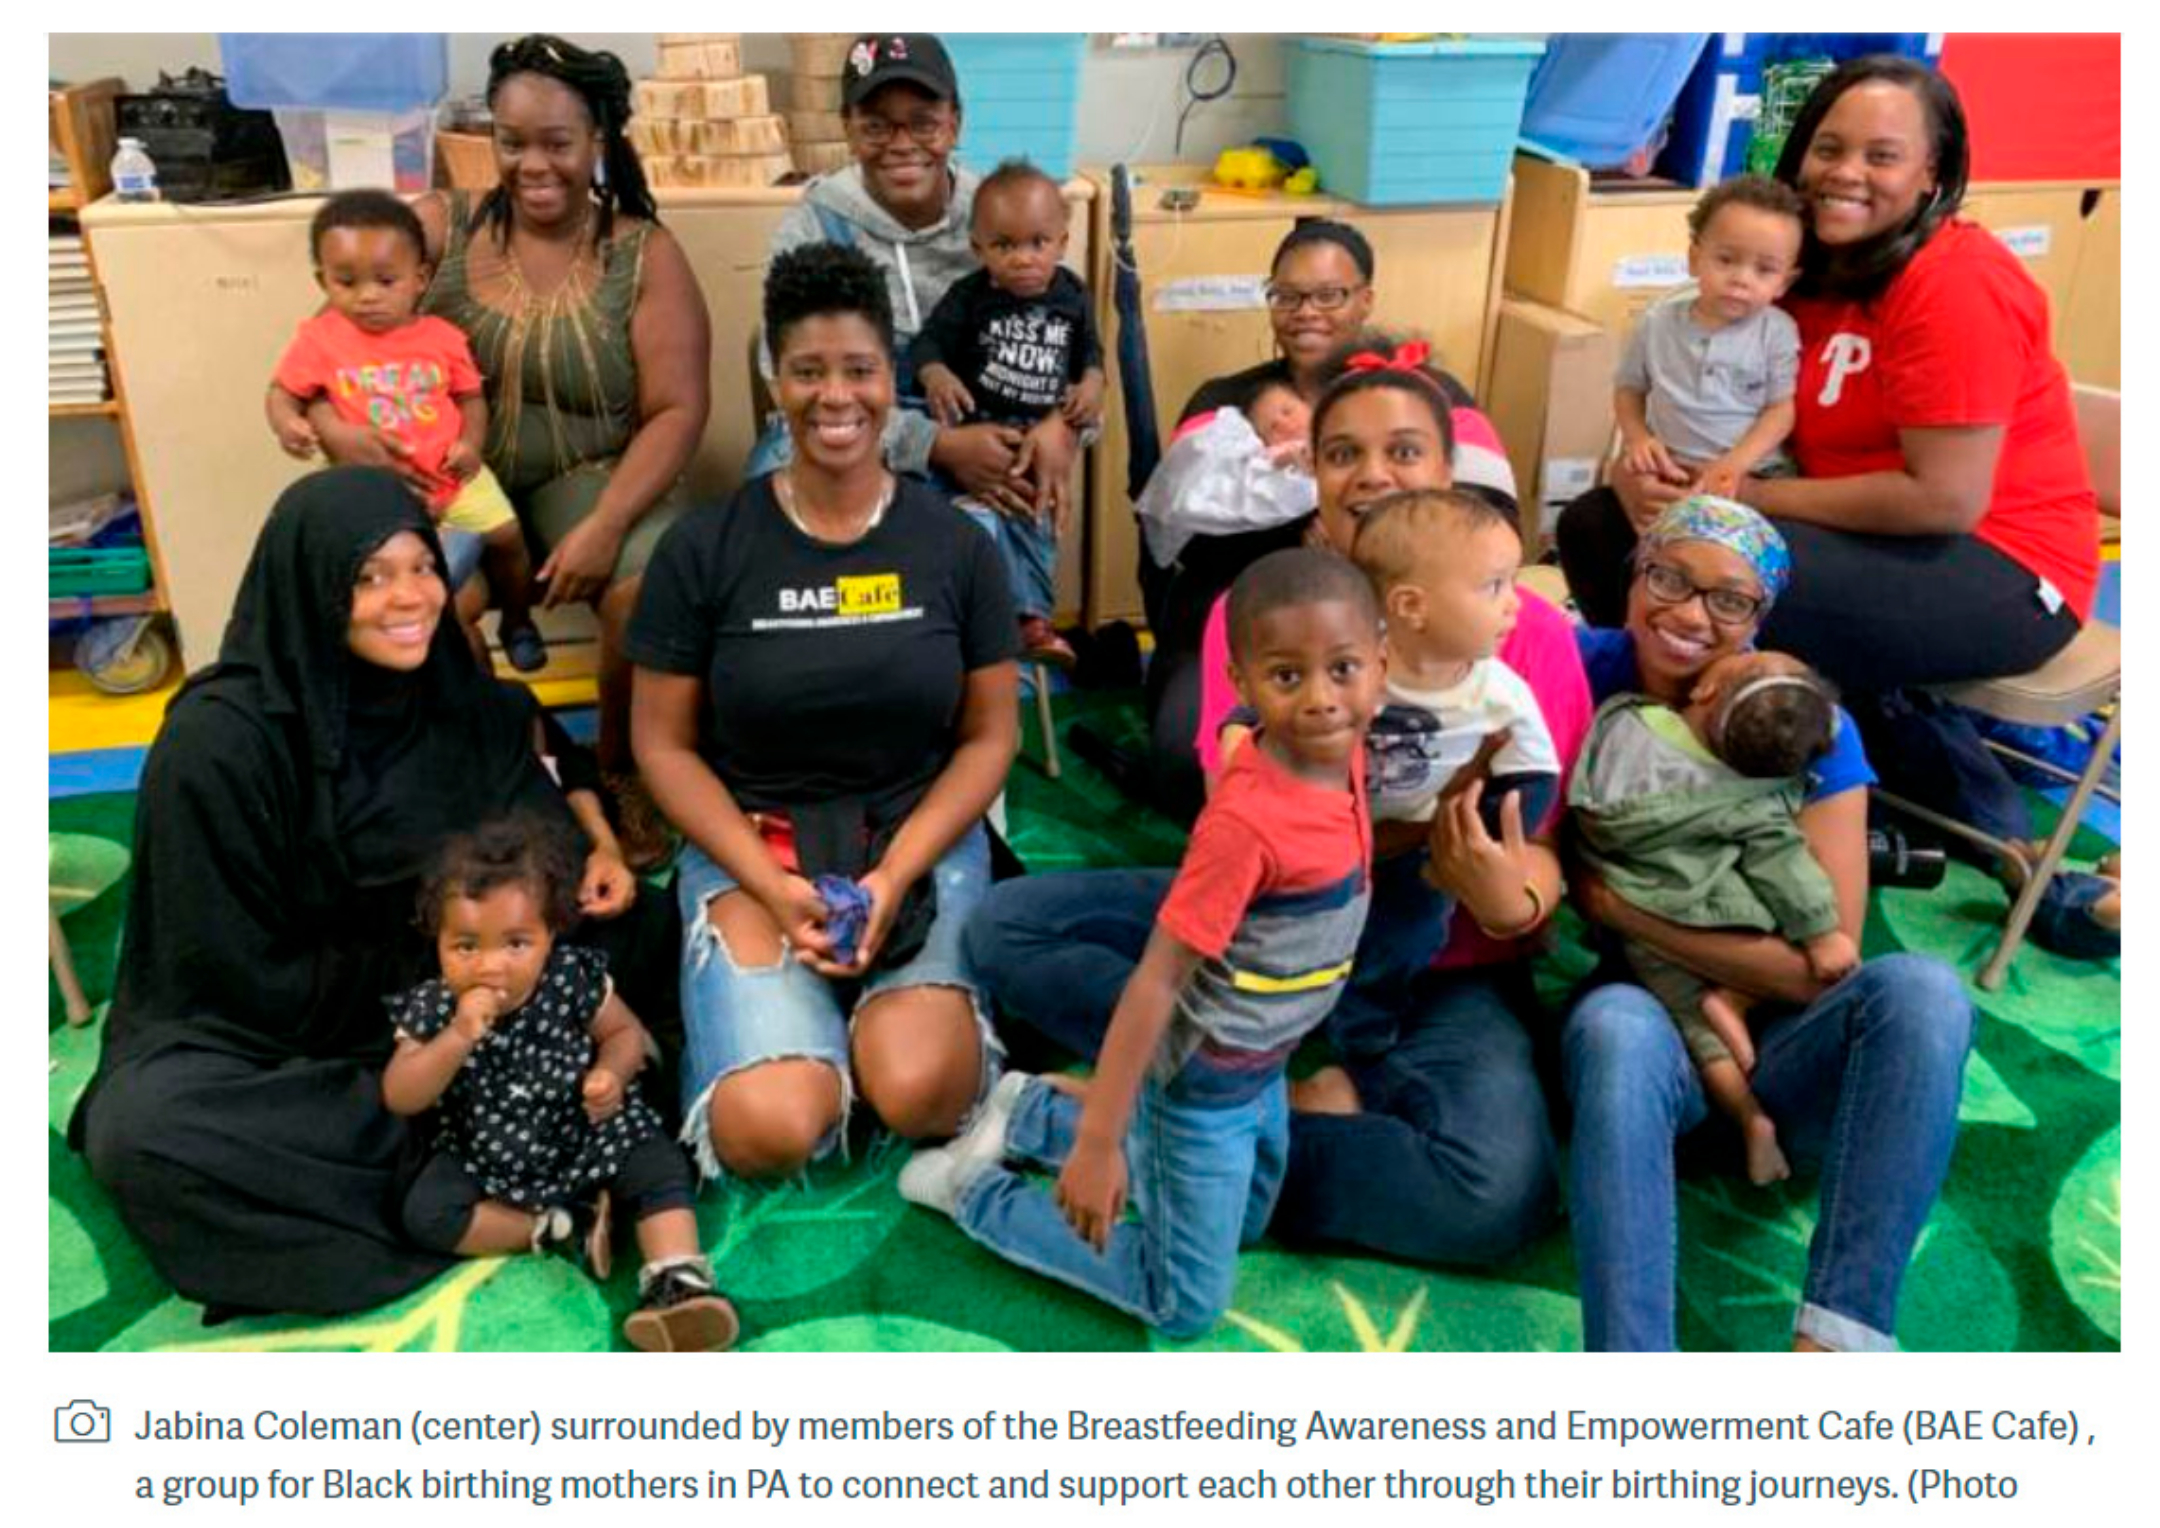 Breastfeeding and Black Women: Raising Awareness About Infant Nutrition